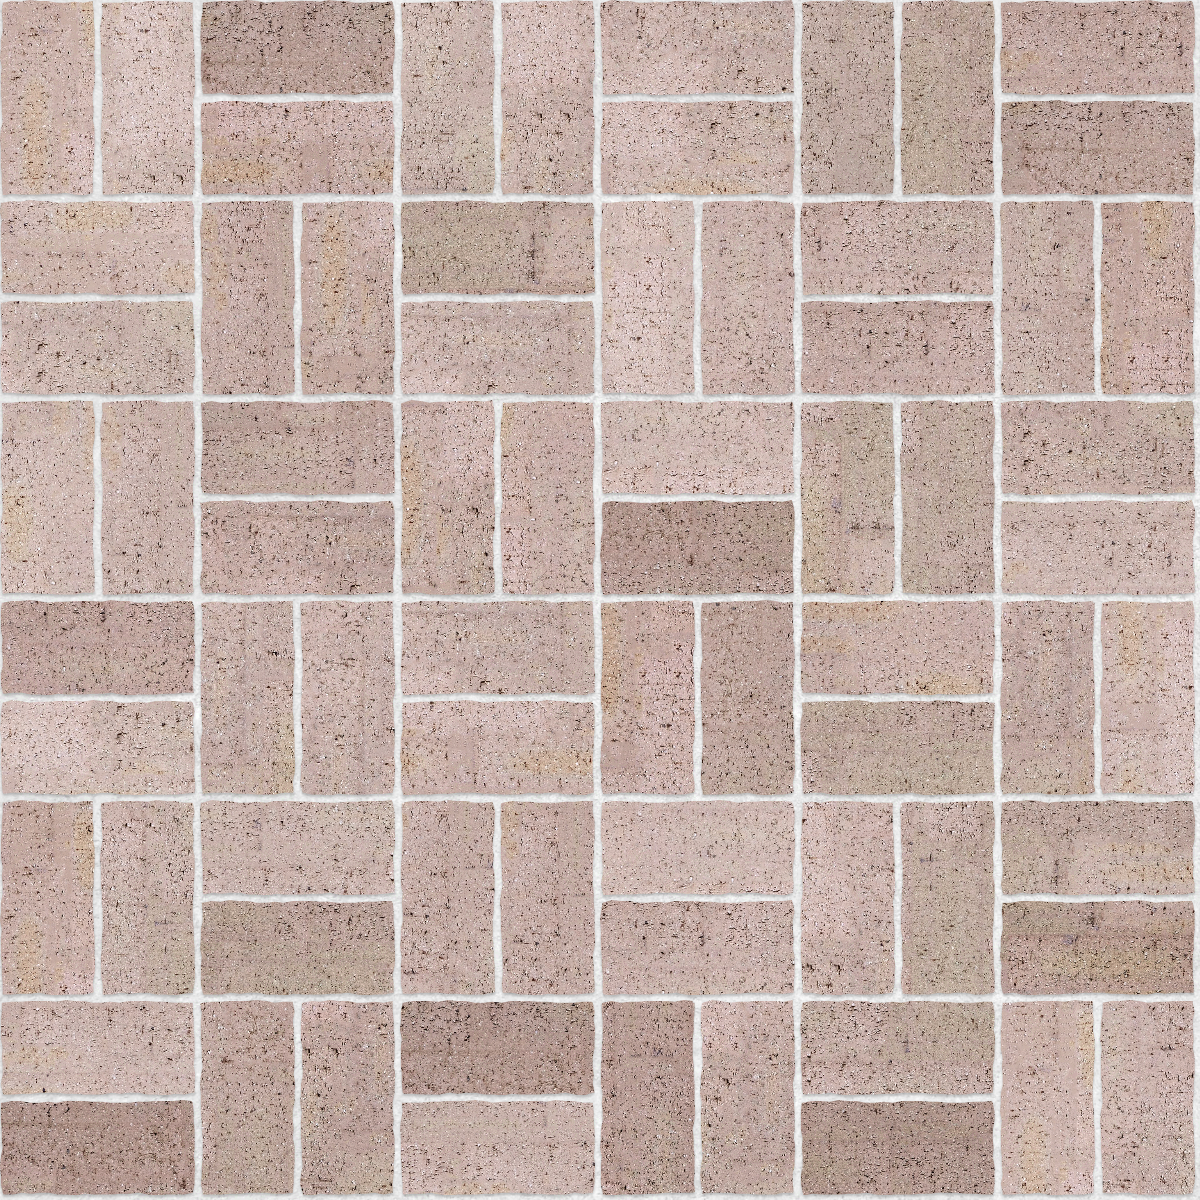 A seamless brick texture with even drag brick units arranged in a Basketweave pattern